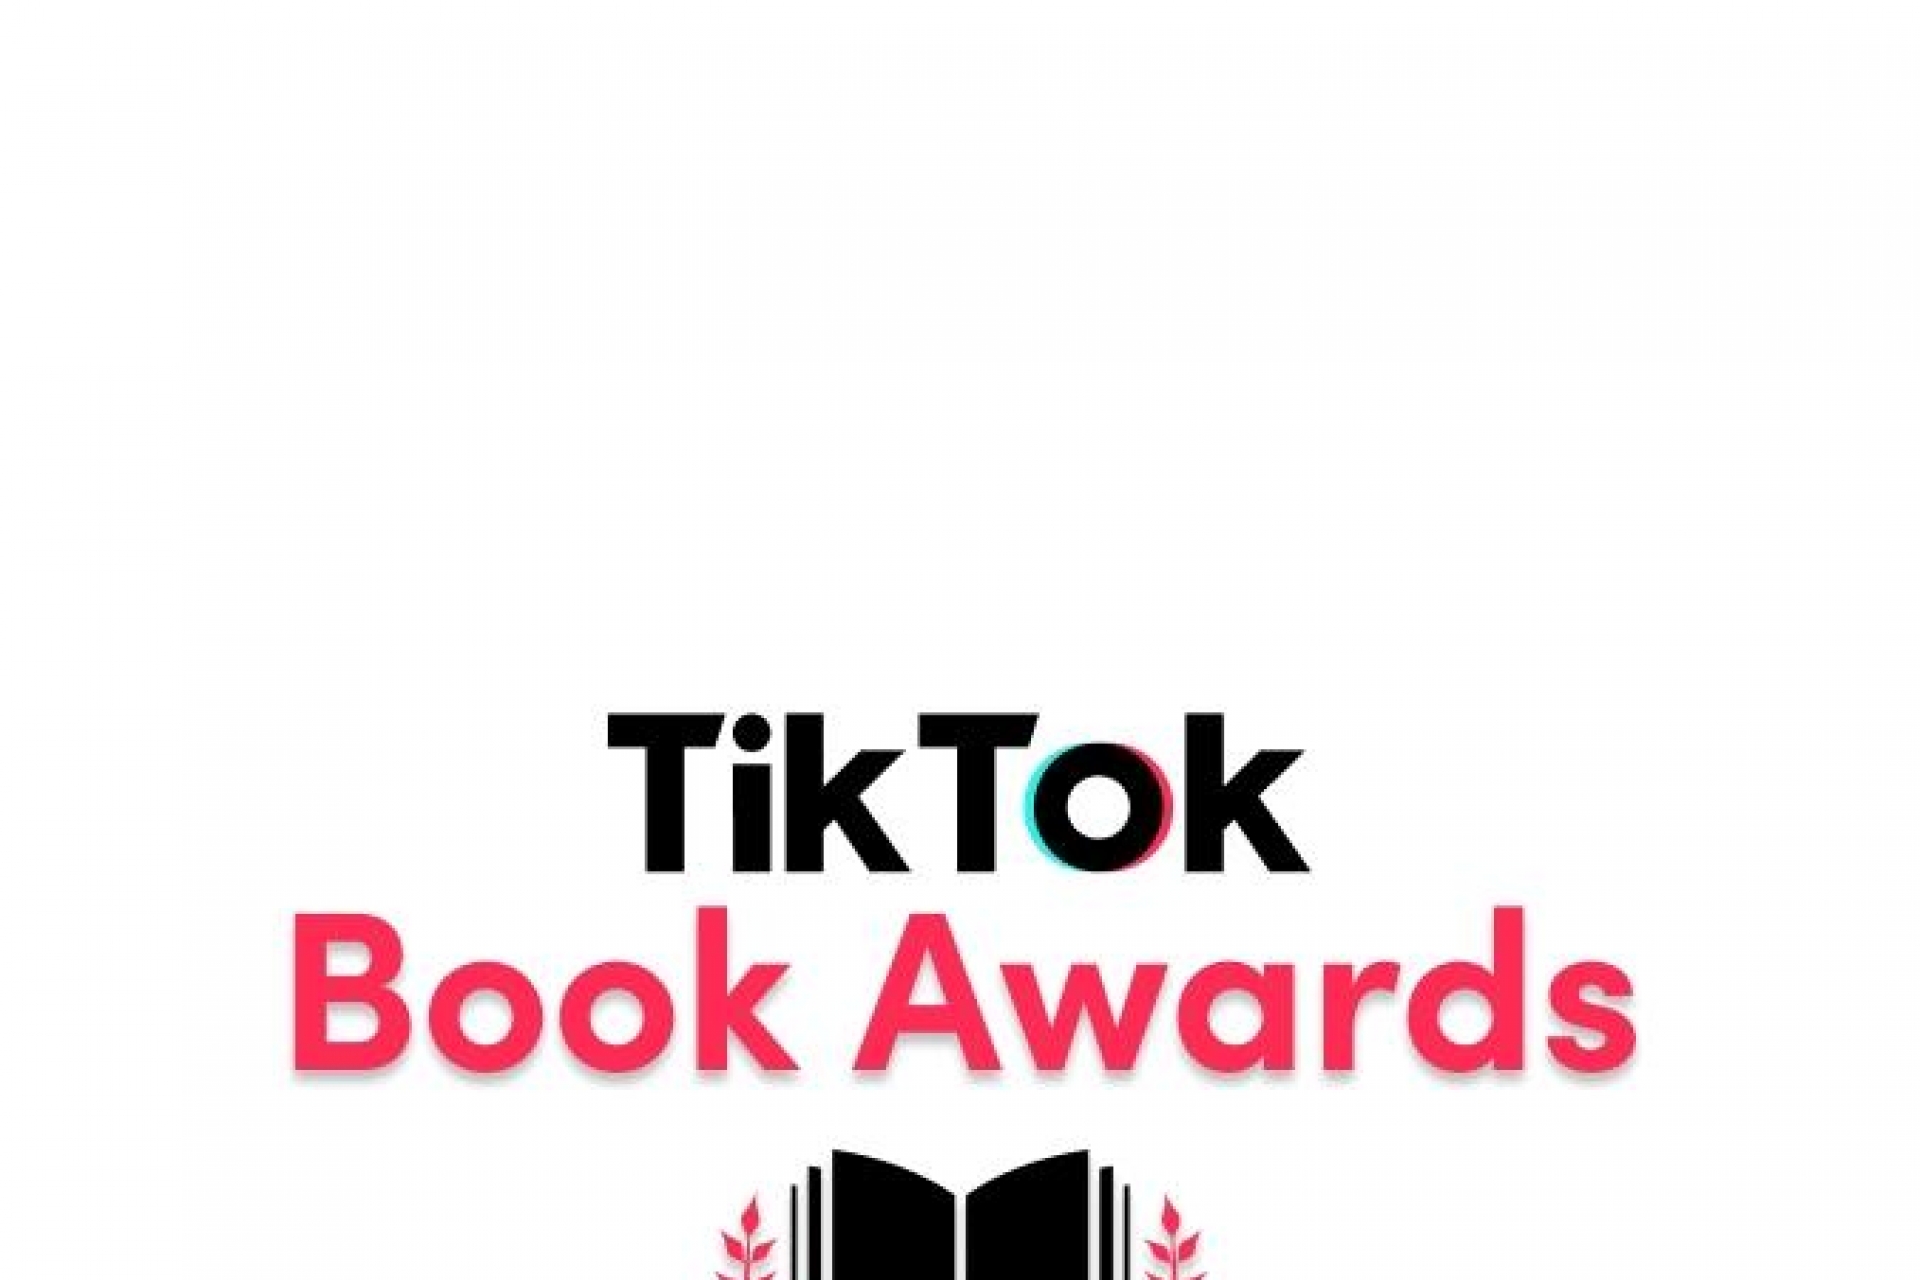 TikTok launching its own book awards to celebrate titles, authors, content and creators of BookTok.